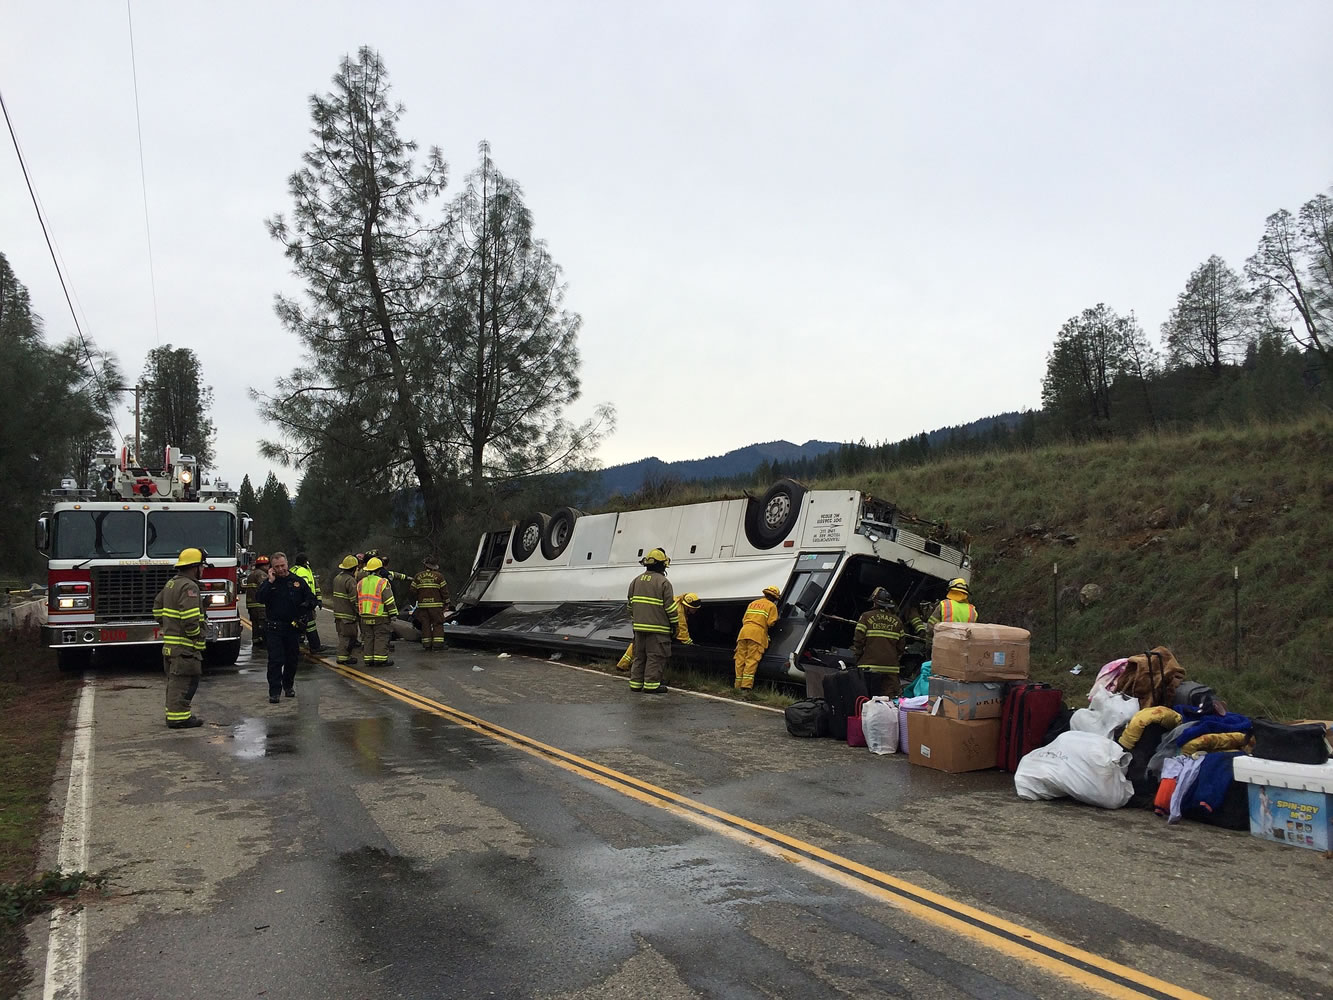 Emergency personnel check a tour bus that had already crashed earlier in the day overturned just off Interstate 5 in Northern California, killing one person and sending dozens to hospitals near the Pollard Flat area in Redding, Calif., Sunday, Nov. 23, 2014.